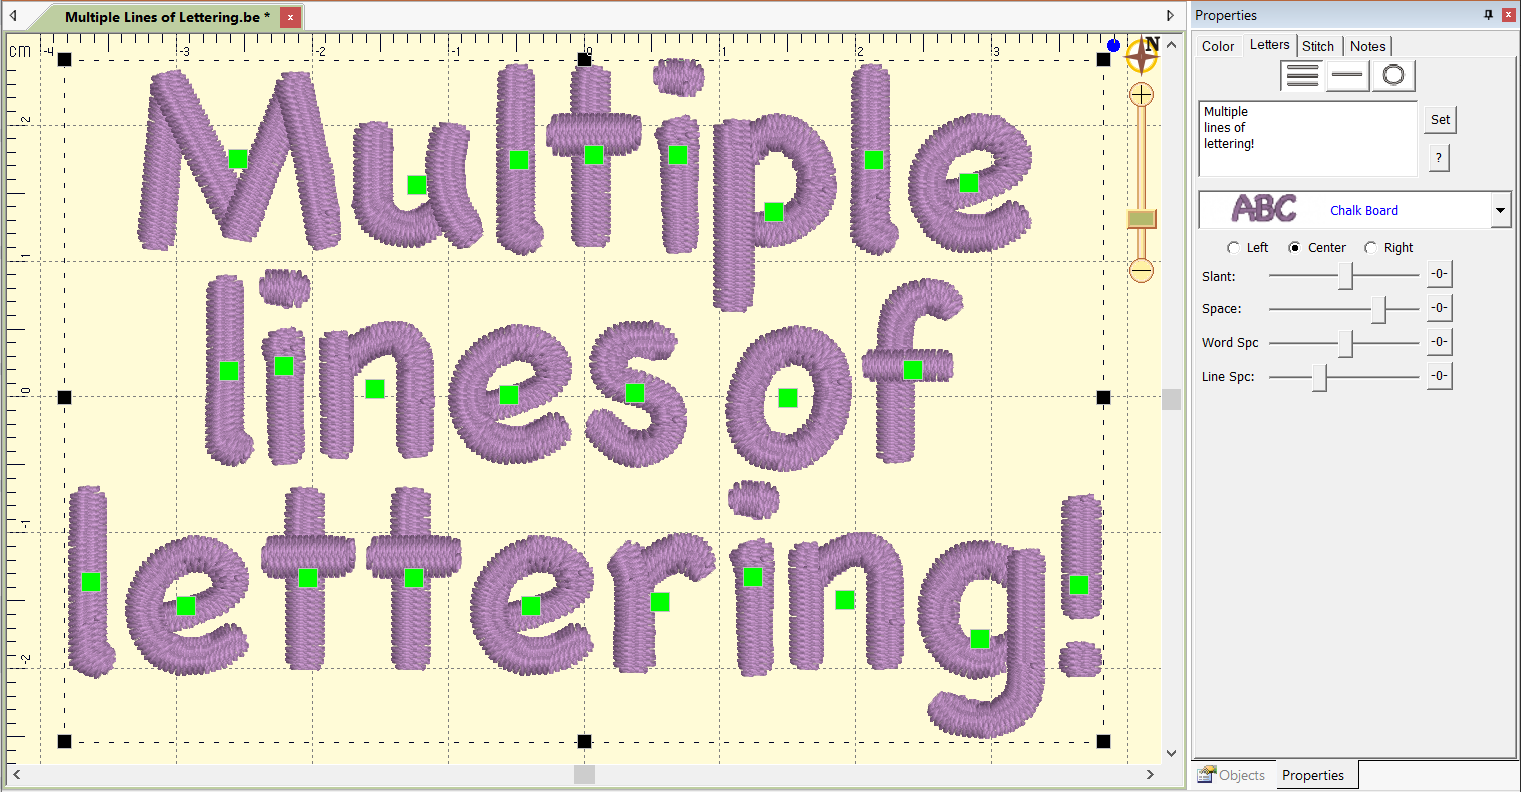 Embrilliance Essentials lets you add text to design with multiple lines of lettering and specific multiline controls.